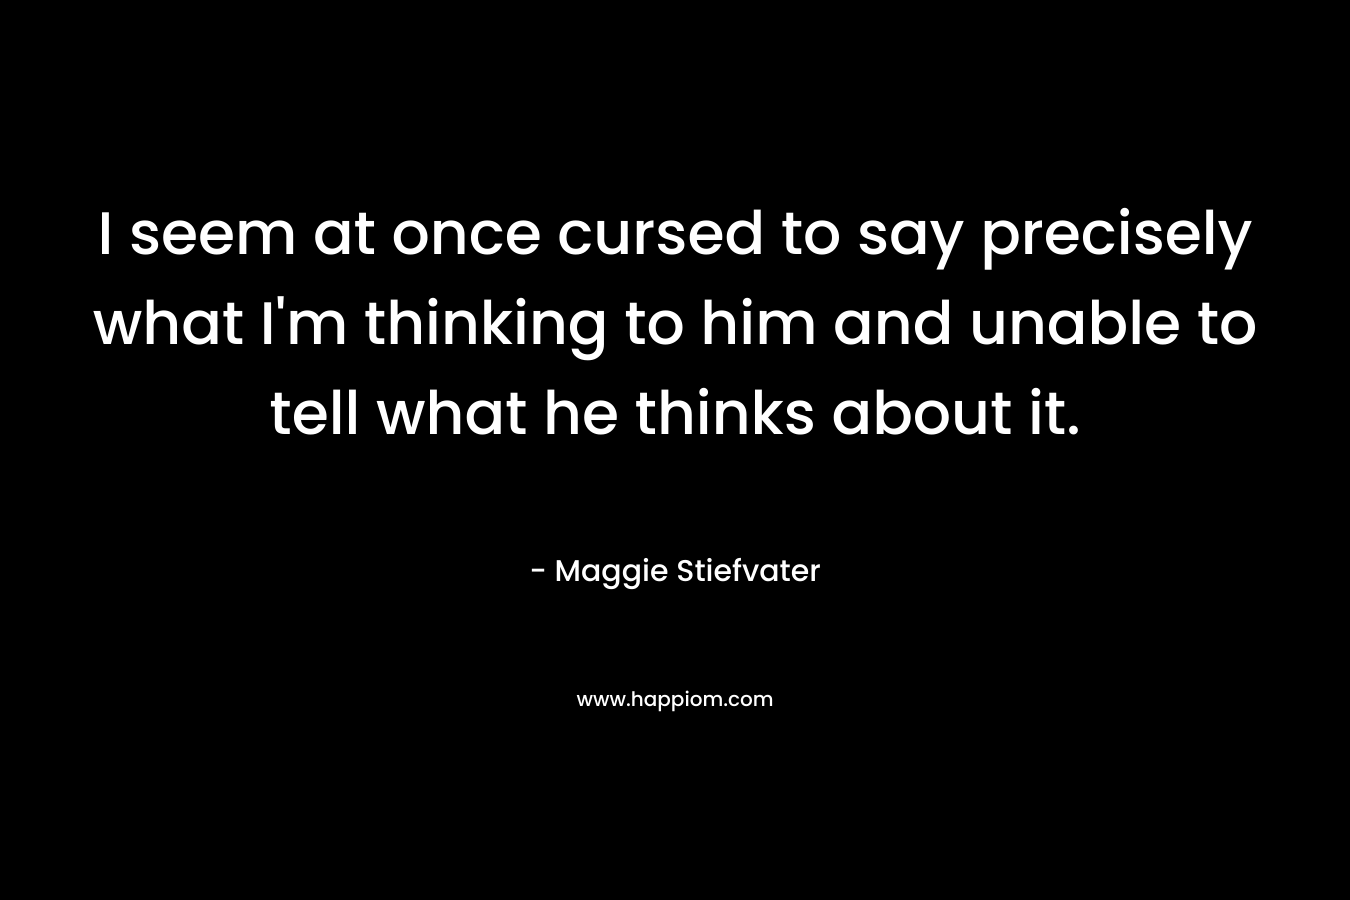 I seem at once cursed to say precisely what I’m thinking to him and unable to tell what he thinks about it. – Maggie Stiefvater